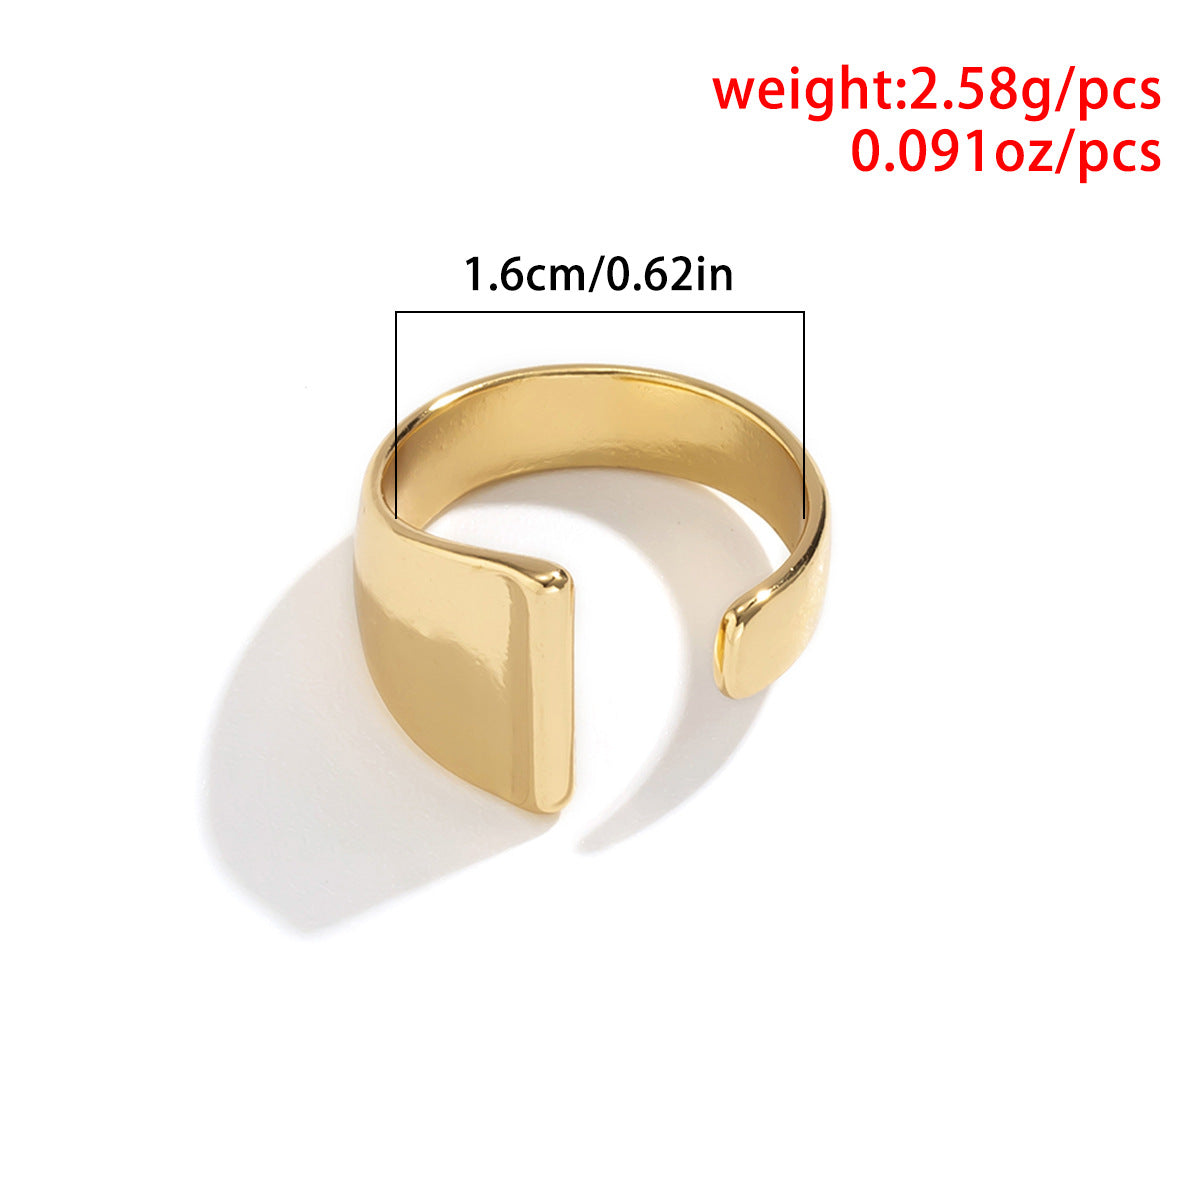 Geometric Hollow Gold Ring with Cross-border Styling